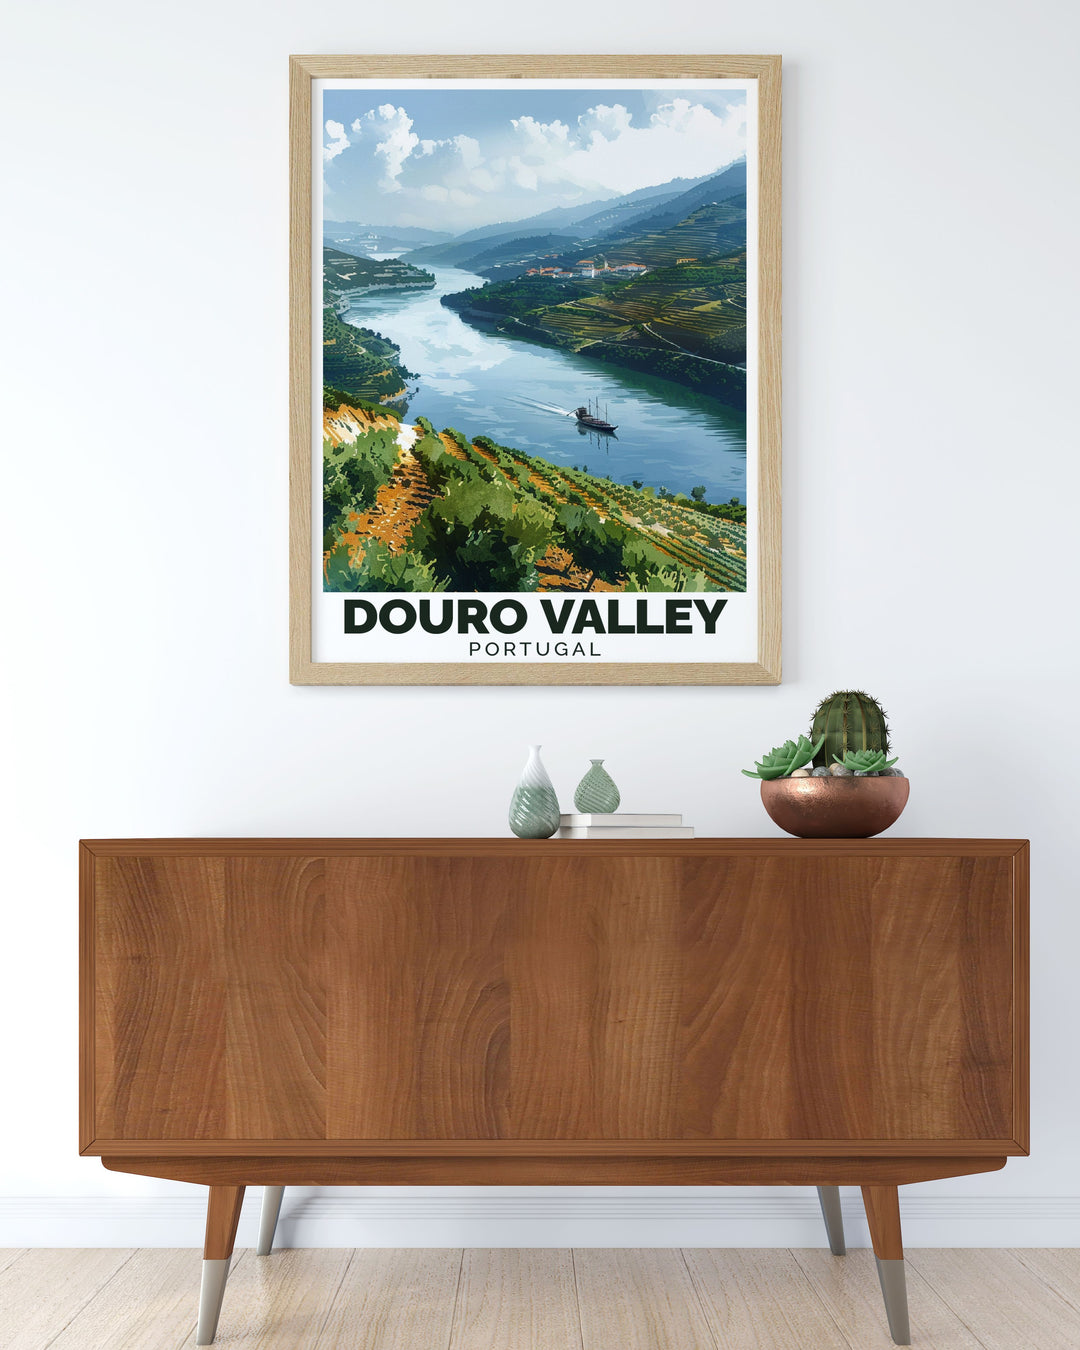 Stunning wall art of the Douro Valley capturing the rustic charm and serene vistas of Portugals Douro River, perfect for adding a touch of vineyard elegance to your living space.